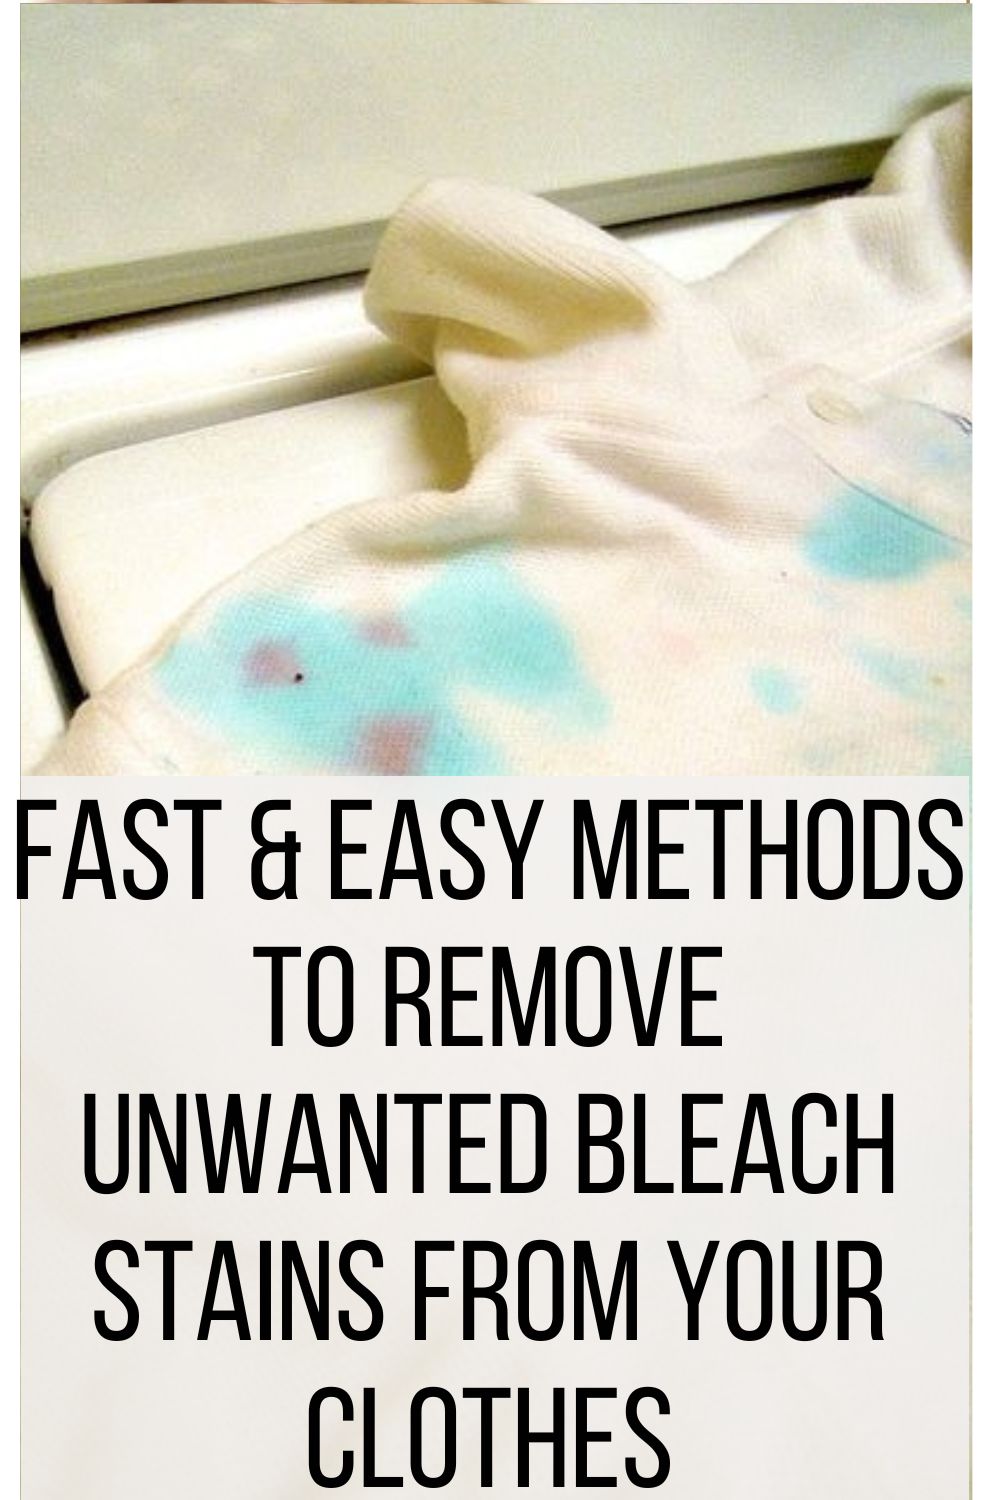 Fast & Easy Methods to Remove Unwanted Bleach Stains From Your Clothes